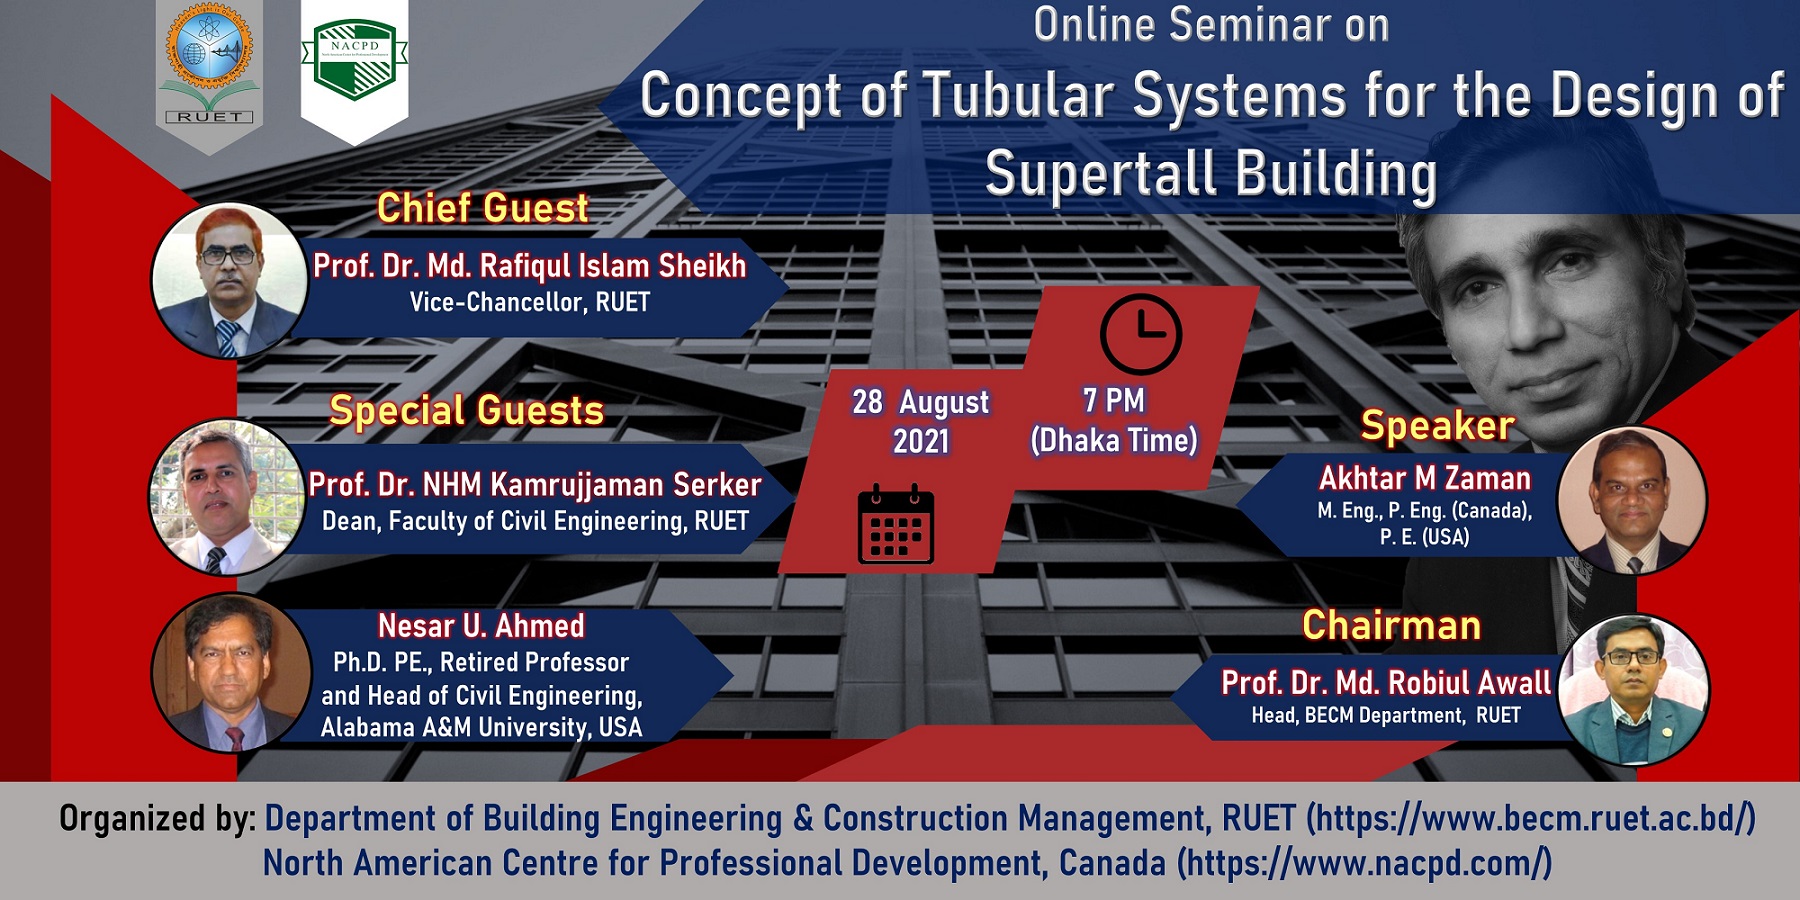 Online Seminar on Concept of Tubular Systems for the Design of Supertall Building